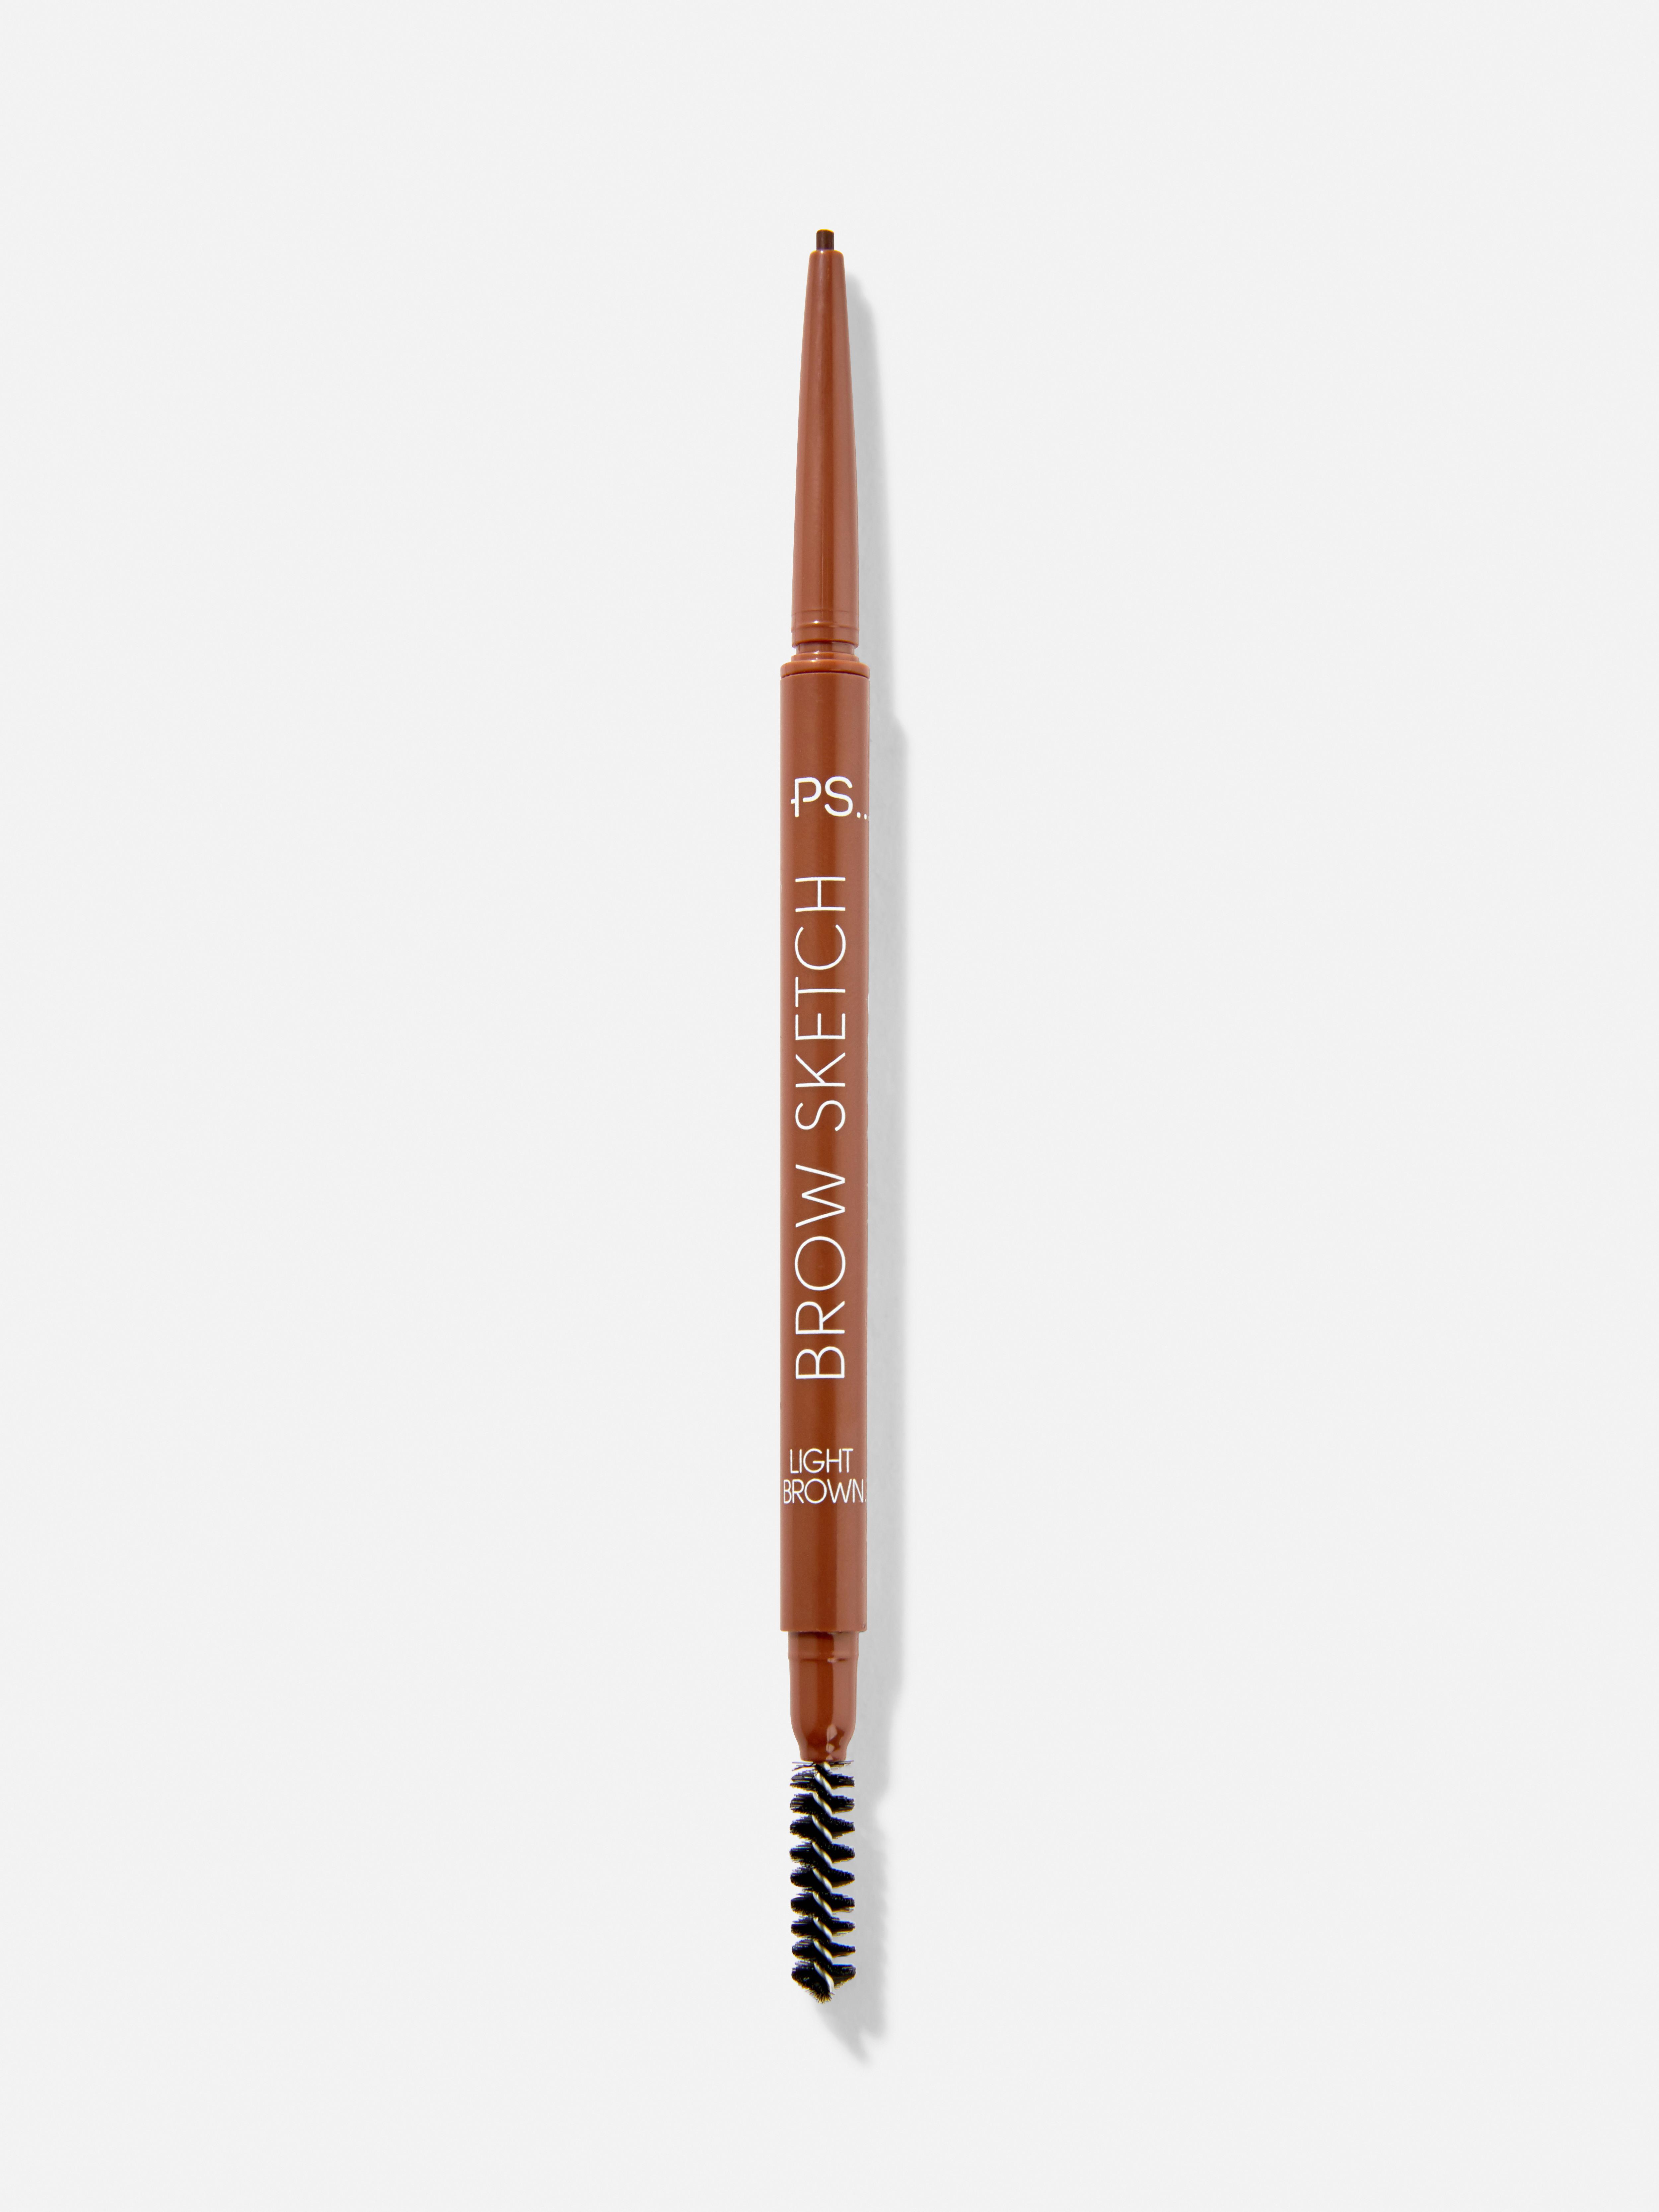 PS Line Brow Defining Duo